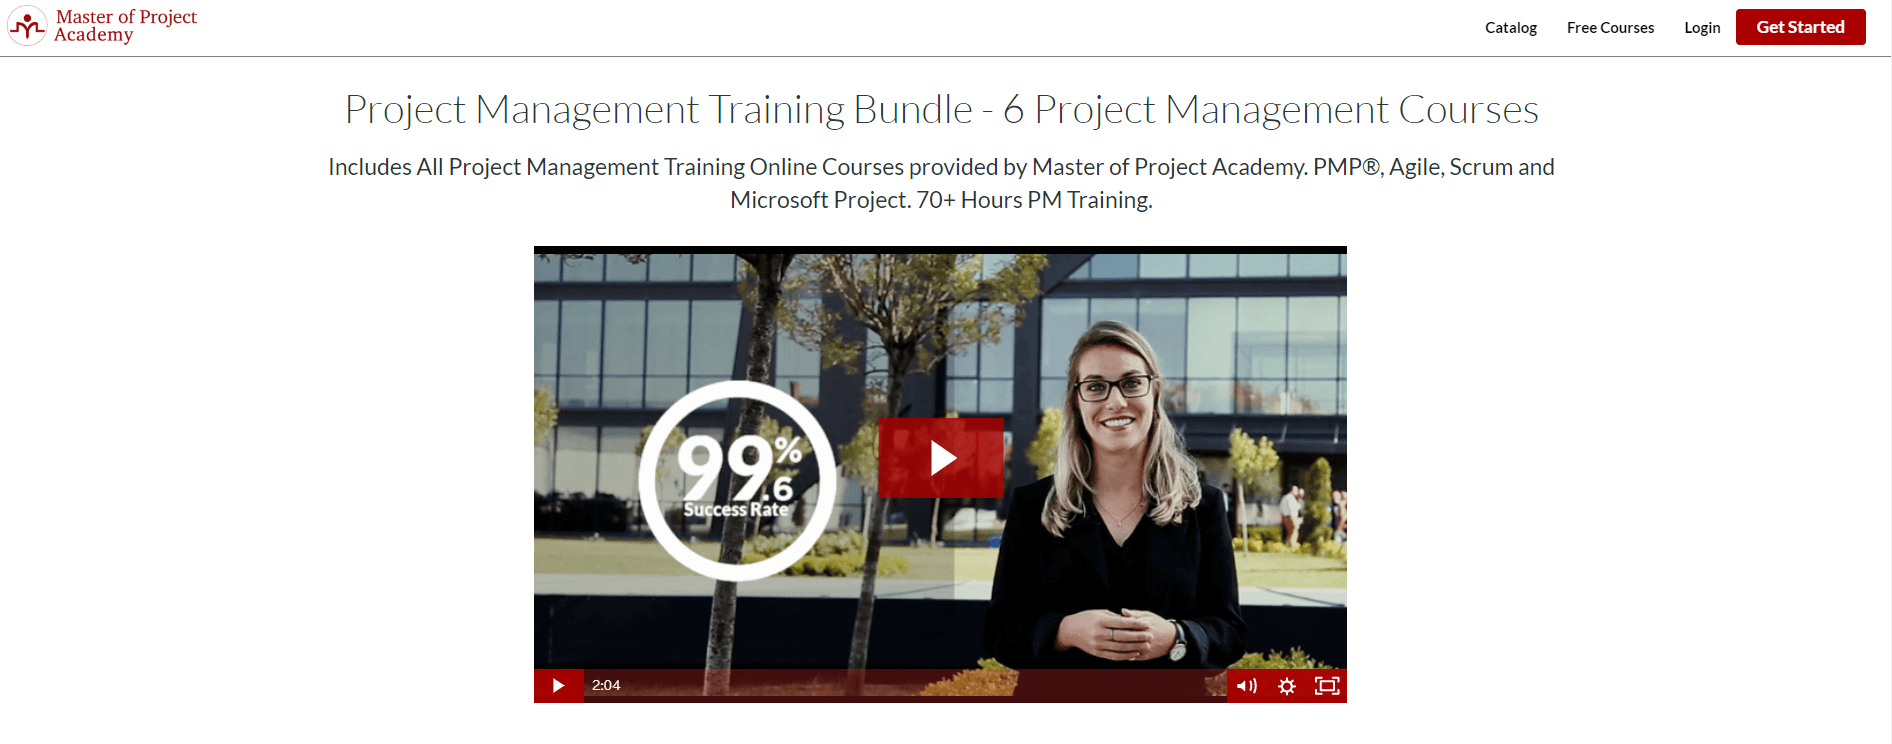 Master of Project Academy Coupon Codes- Project Management Training Online Bundle